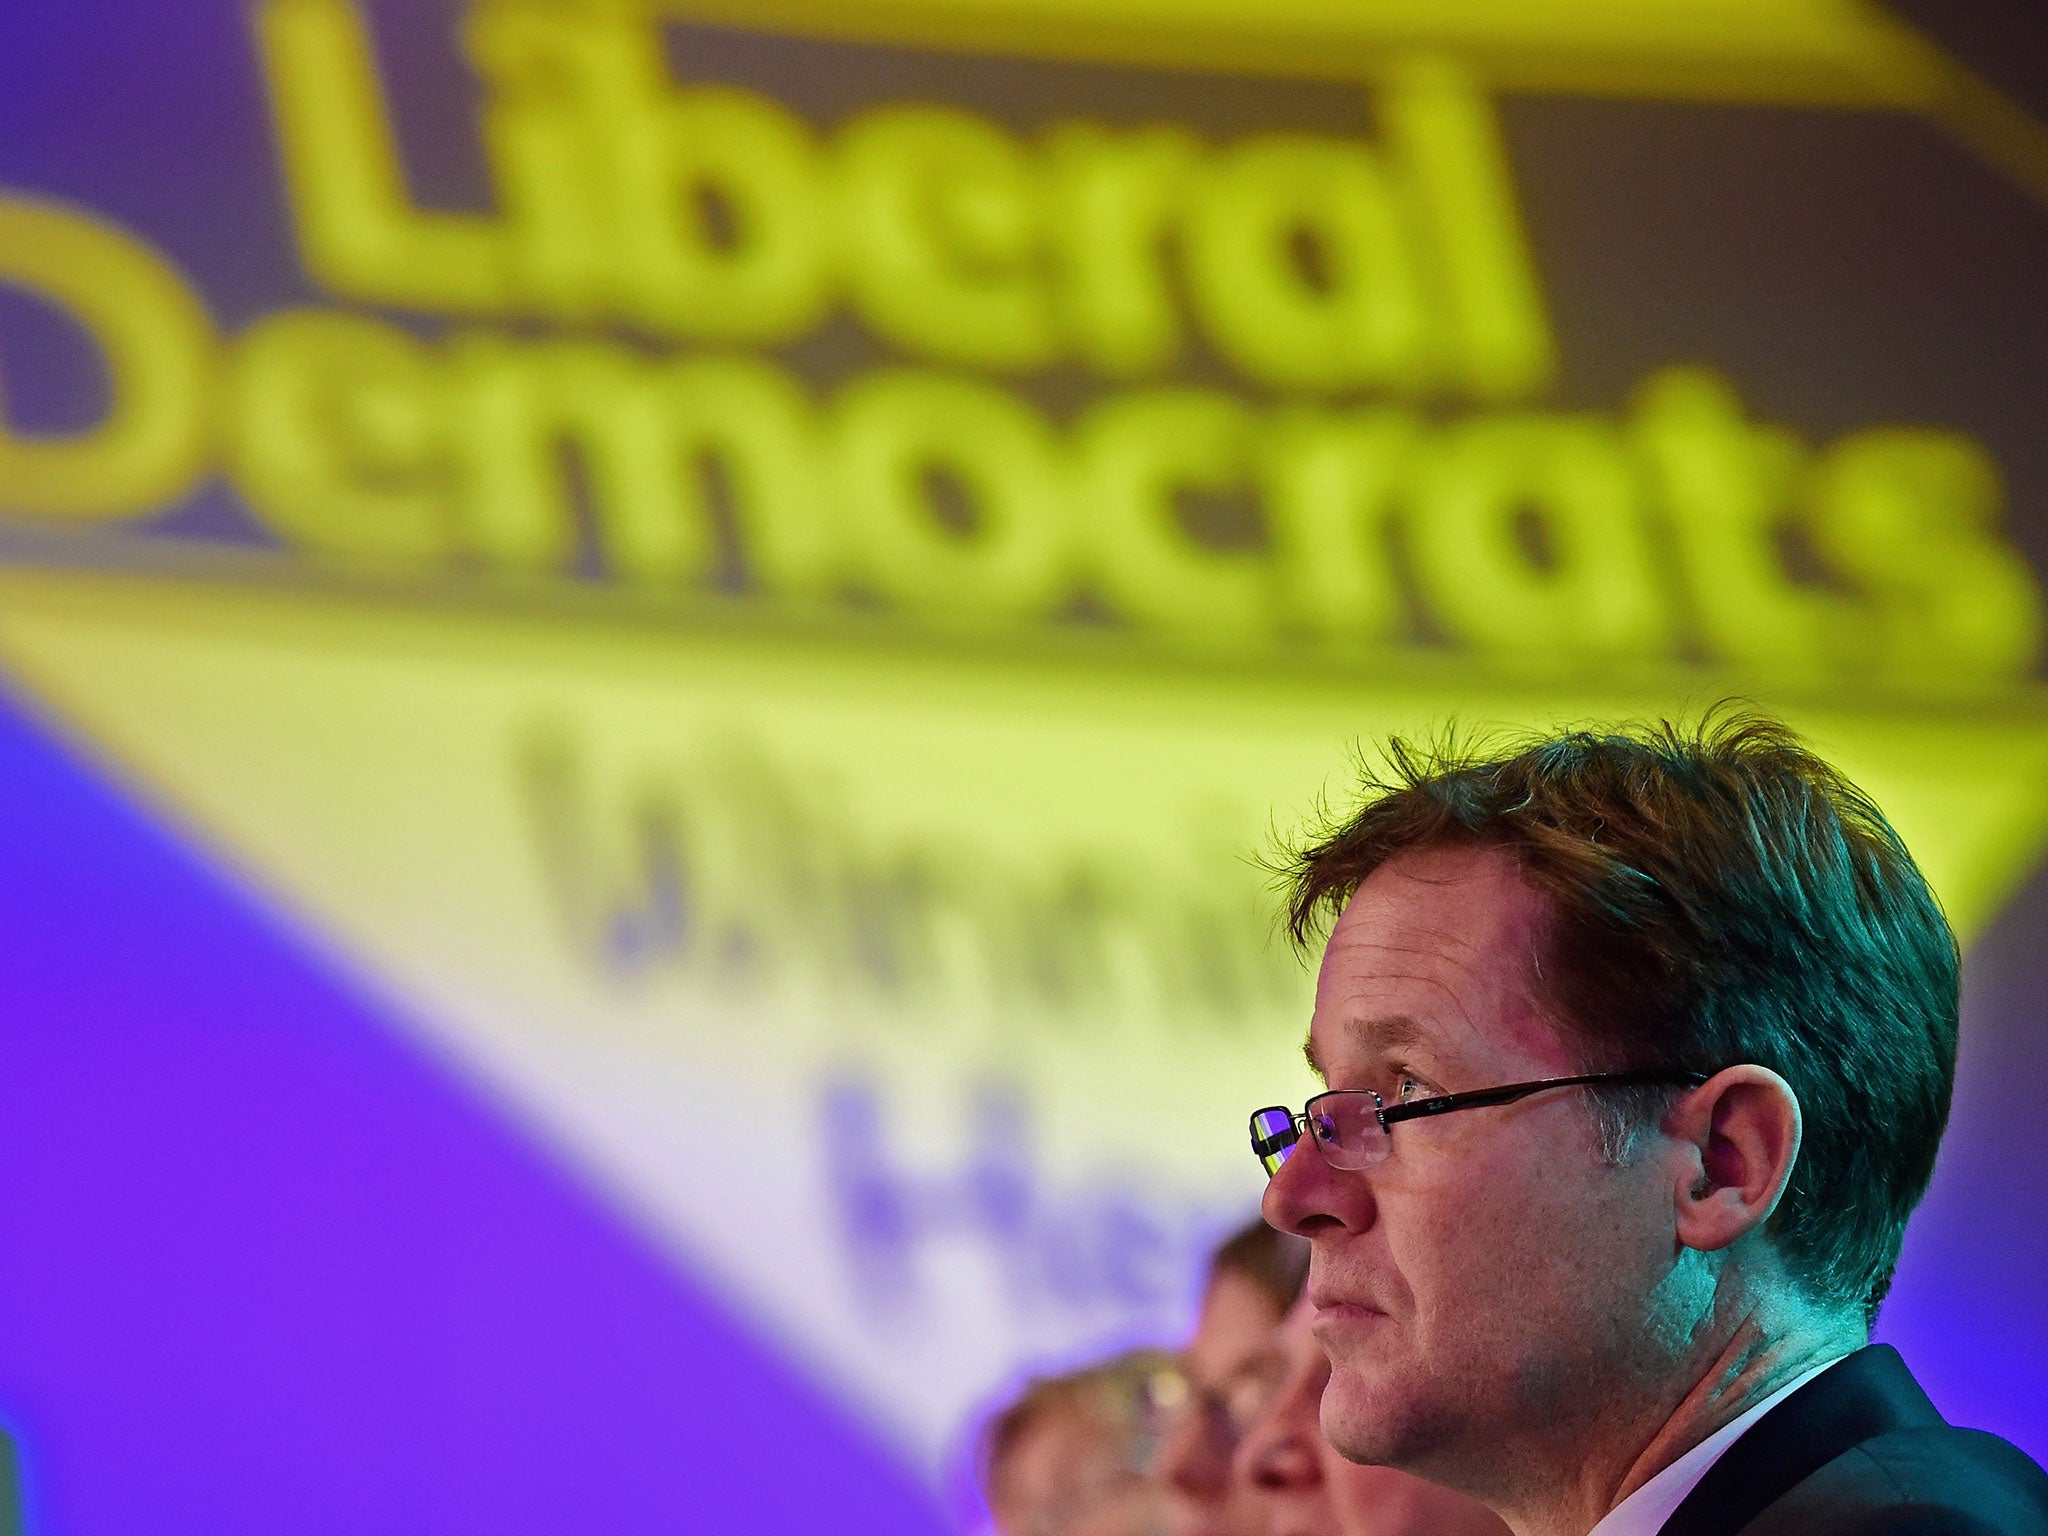 “Nick Clegg took exception to Theresa May’s conference speech in which she accused the Lib Dems of killing children”